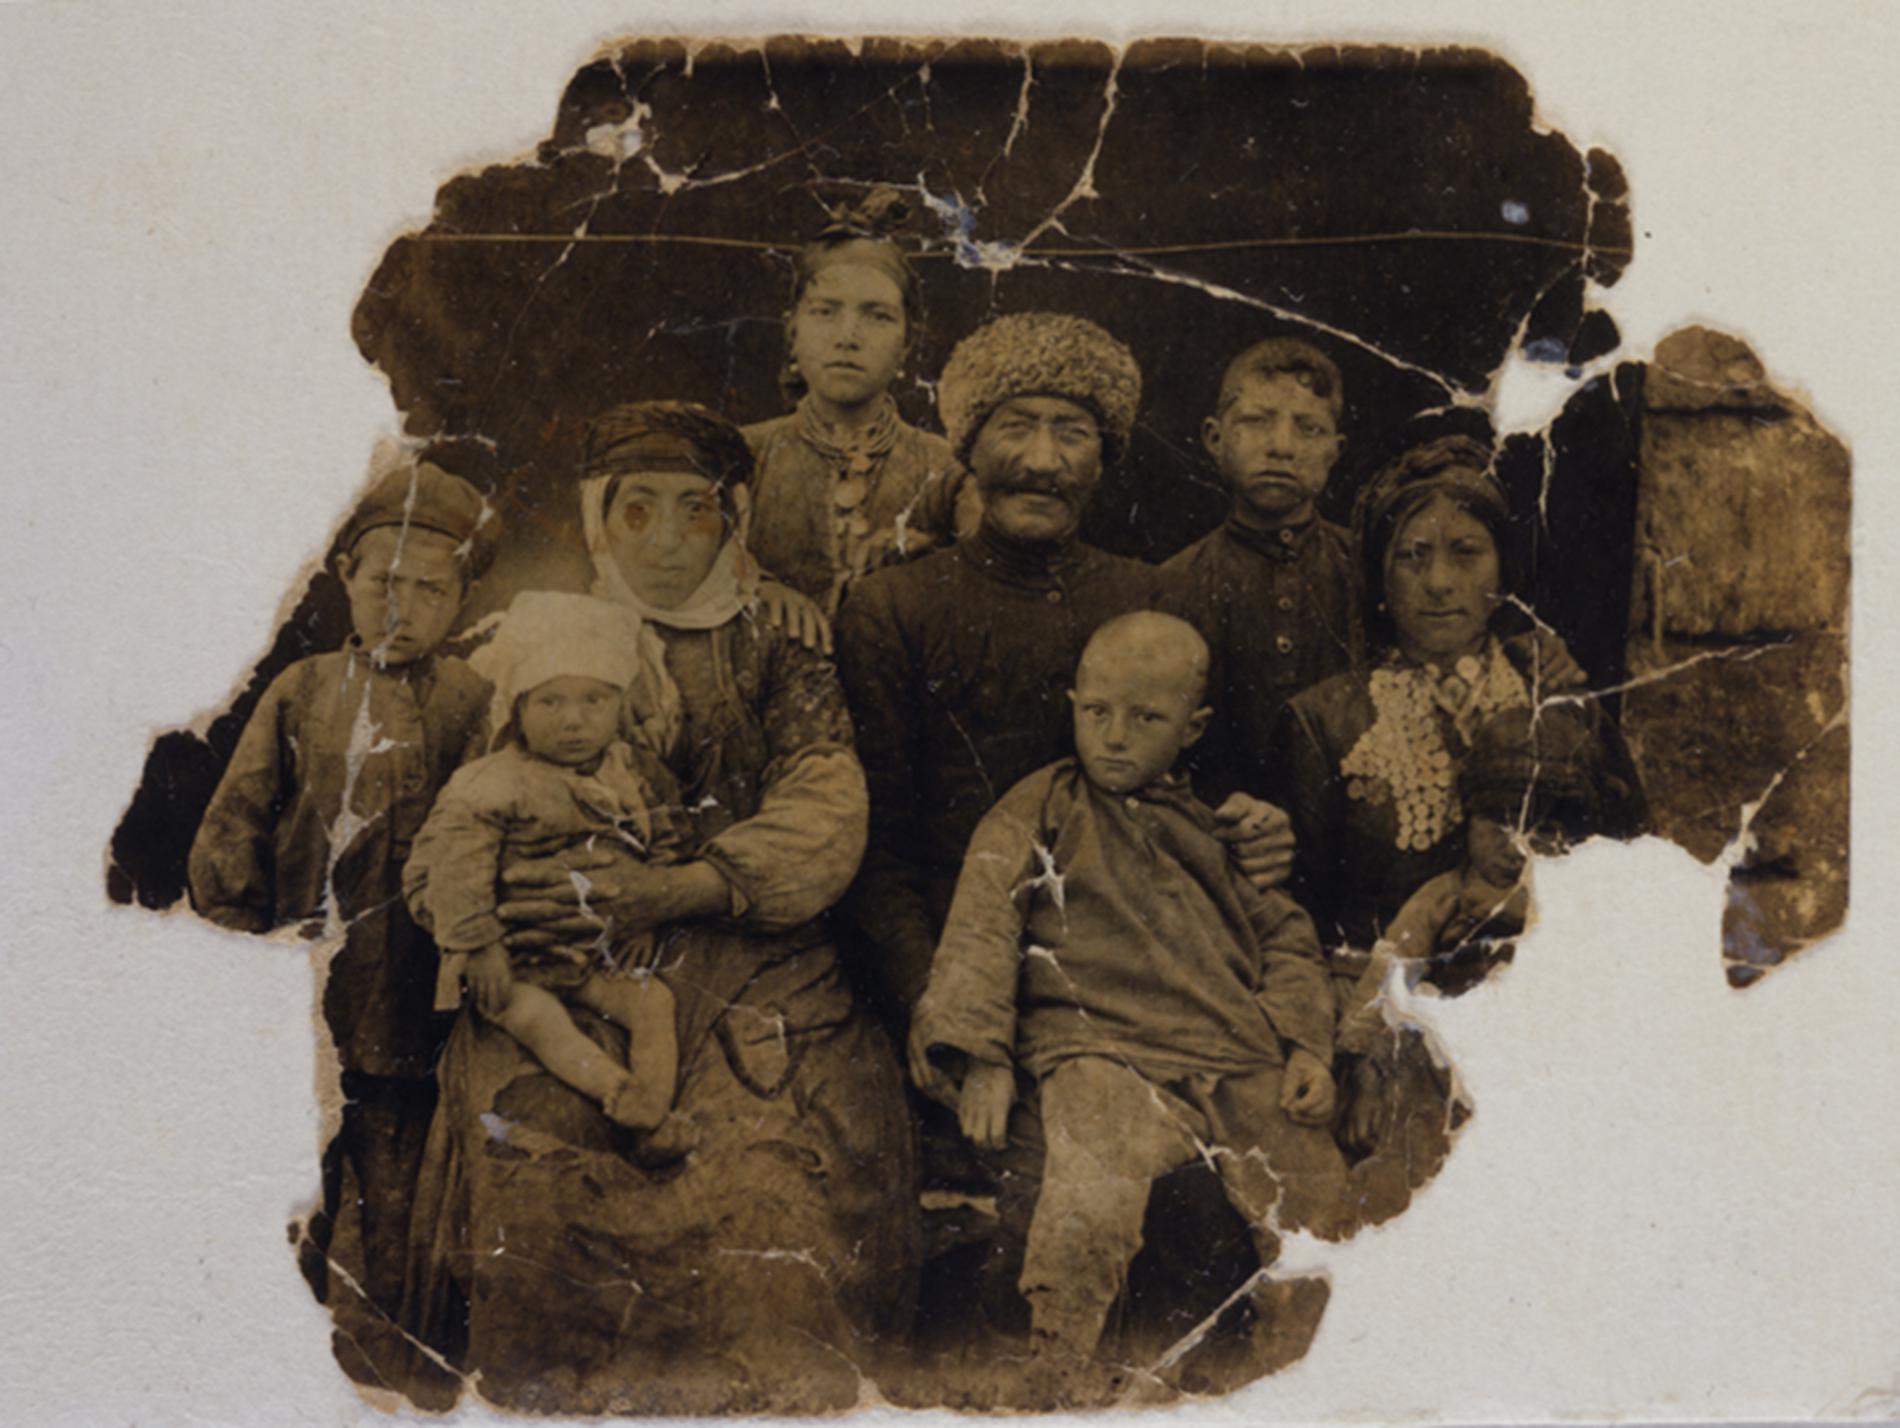 An old, torn photograph of a large family